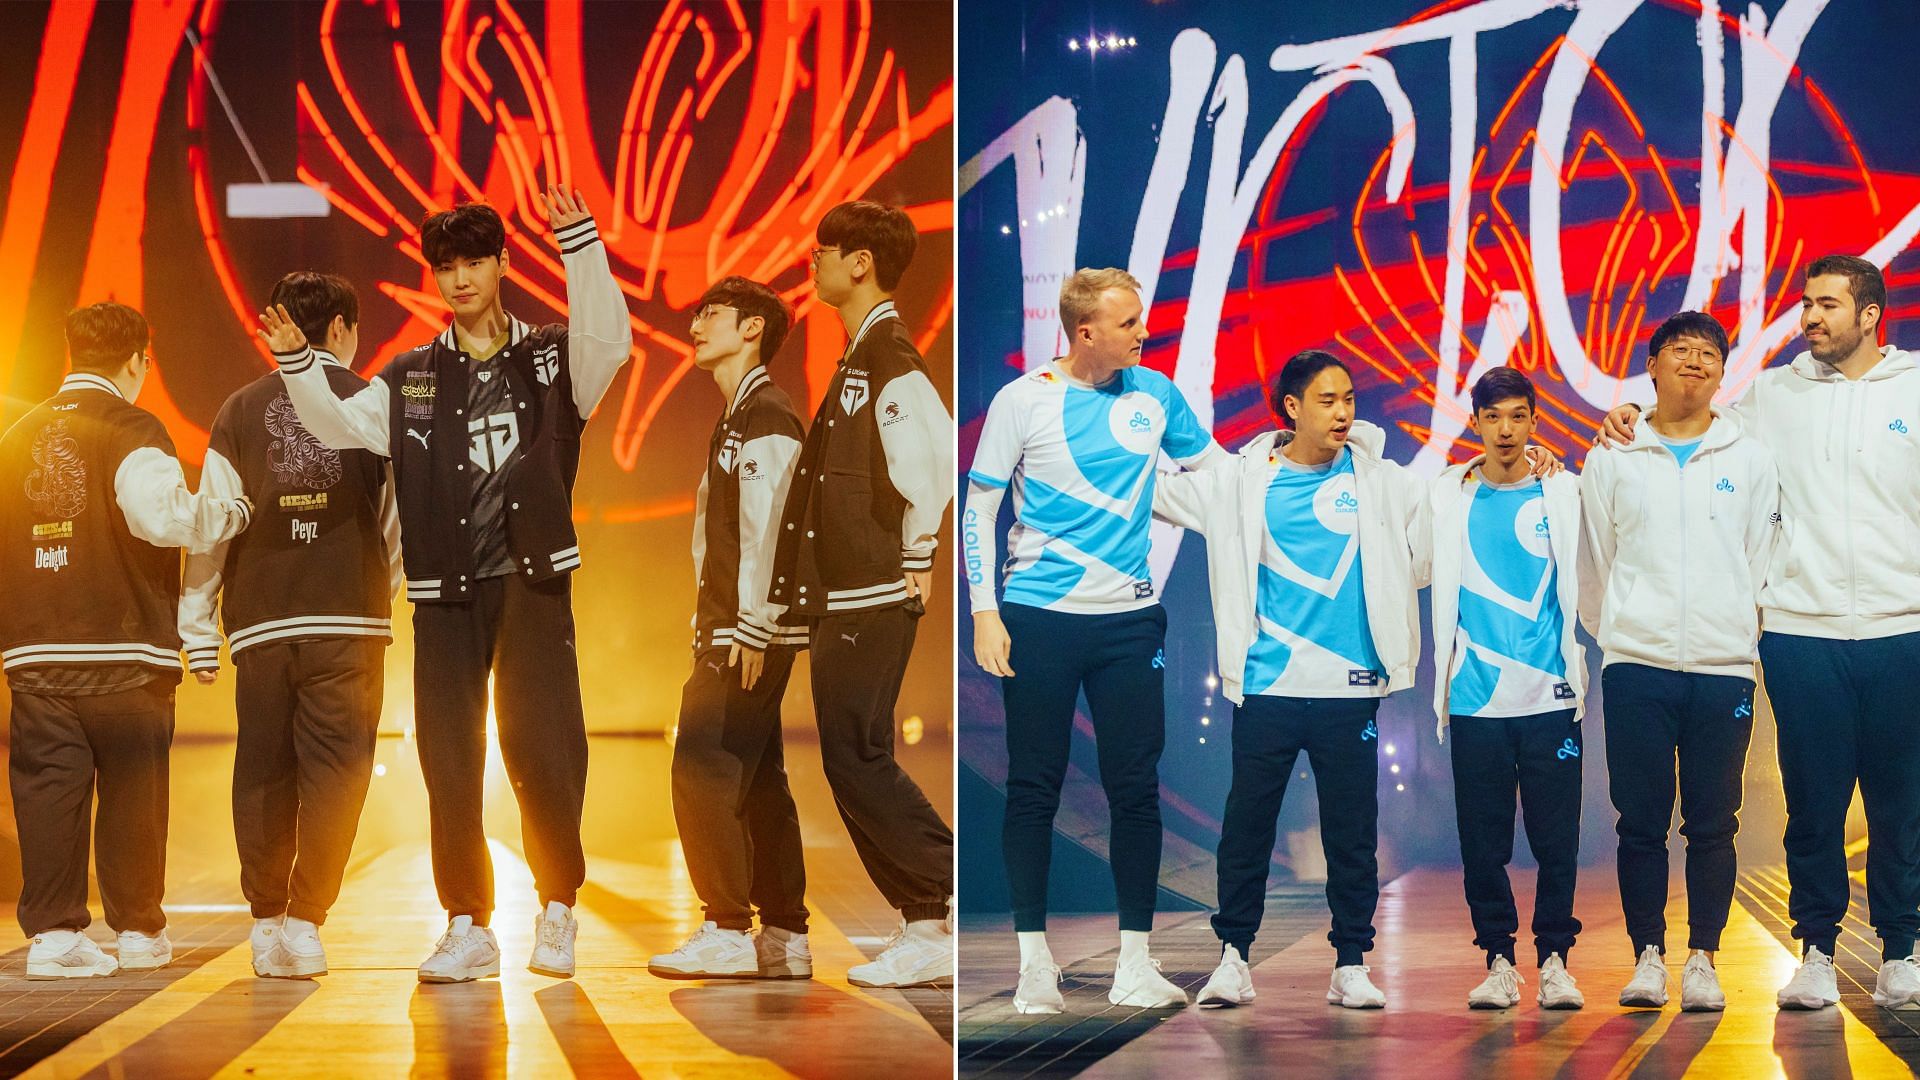 The second match in the Lower Bracket Quarterfinals features: GenG vs Cloud6 (Image via LoL Esports)